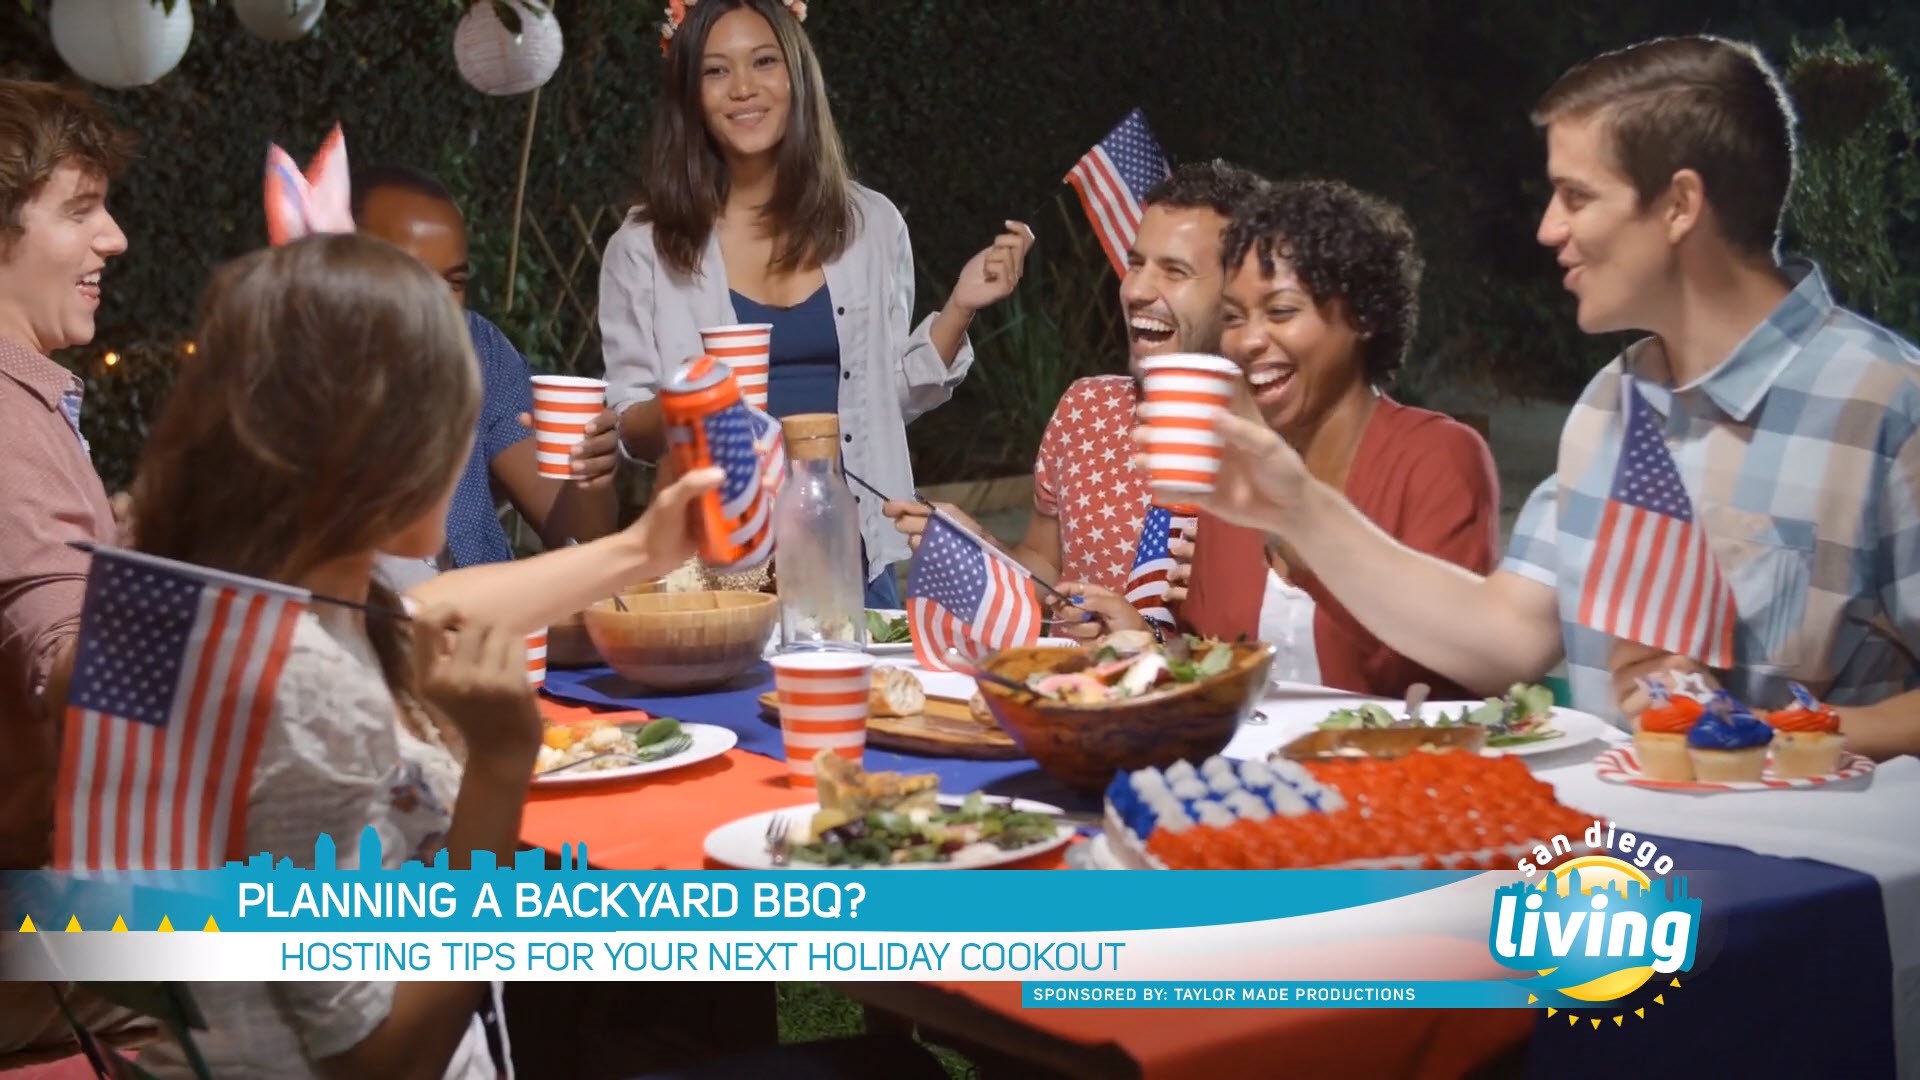 Hosting tips for your next holiday cookout. Sponsored by Taylor Made Productions